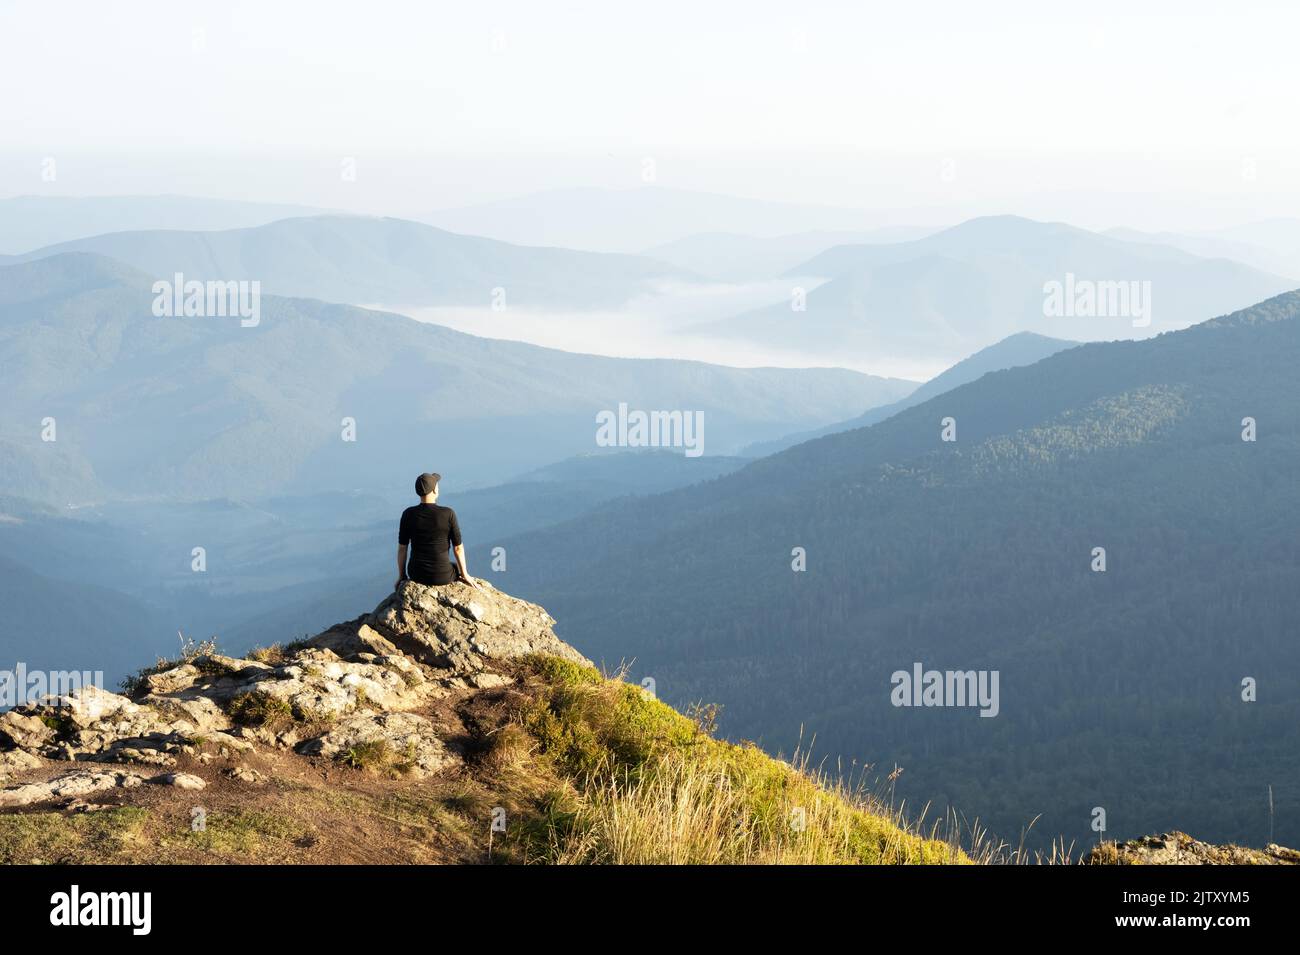 Alone tourist on the edge of the cliff against the backdrop of an incredible sunrise mountains landscape. Travel concept Stock Photo